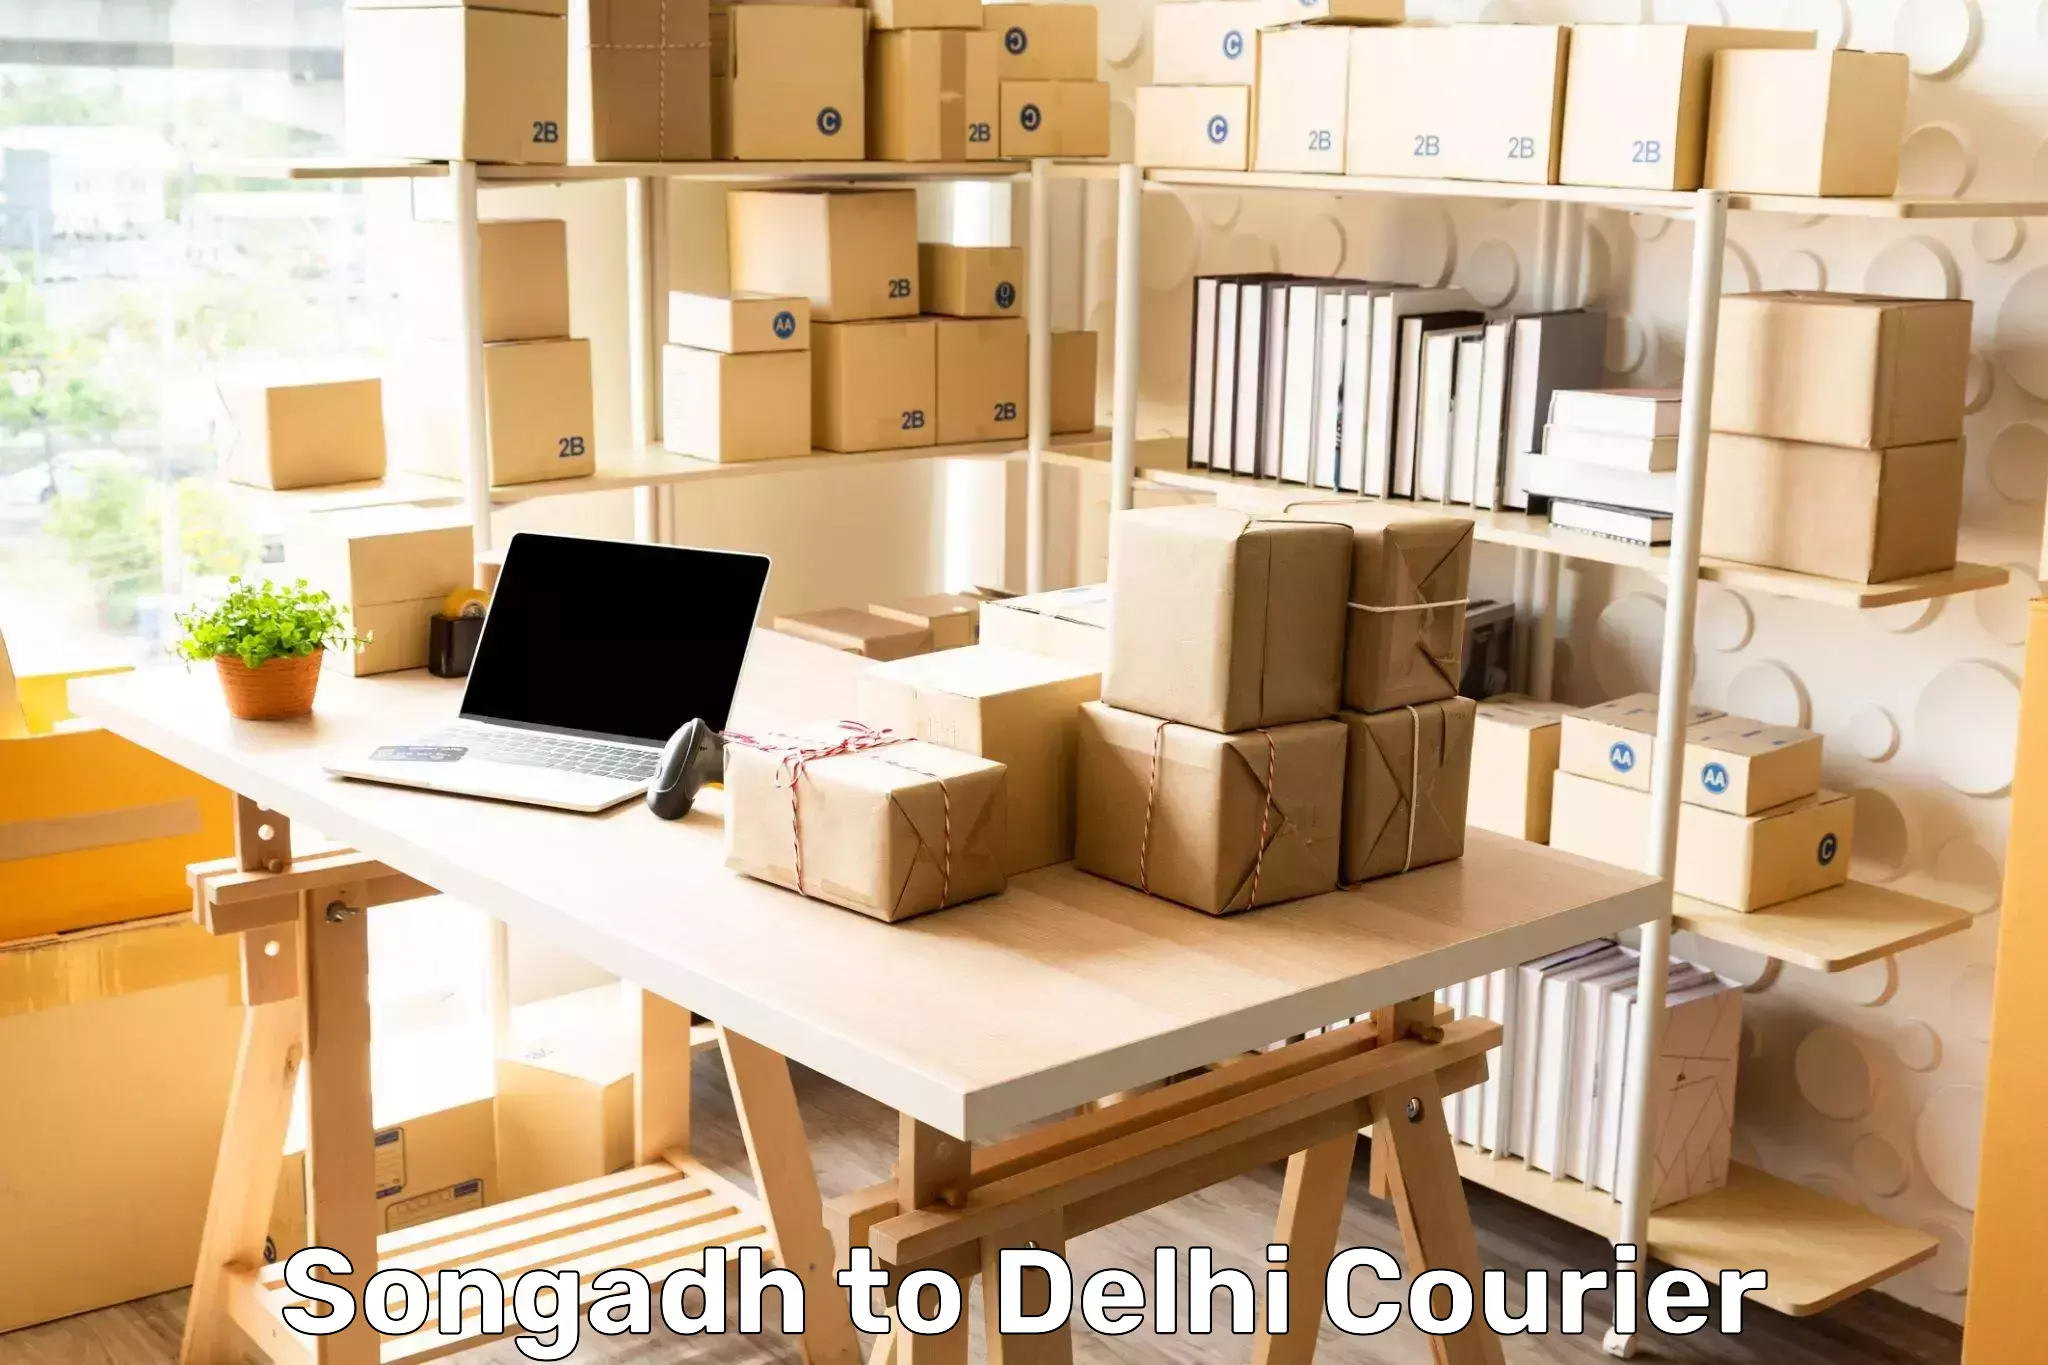 Personal parcel delivery Songadh to Jawaharlal Nehru University New Delhi